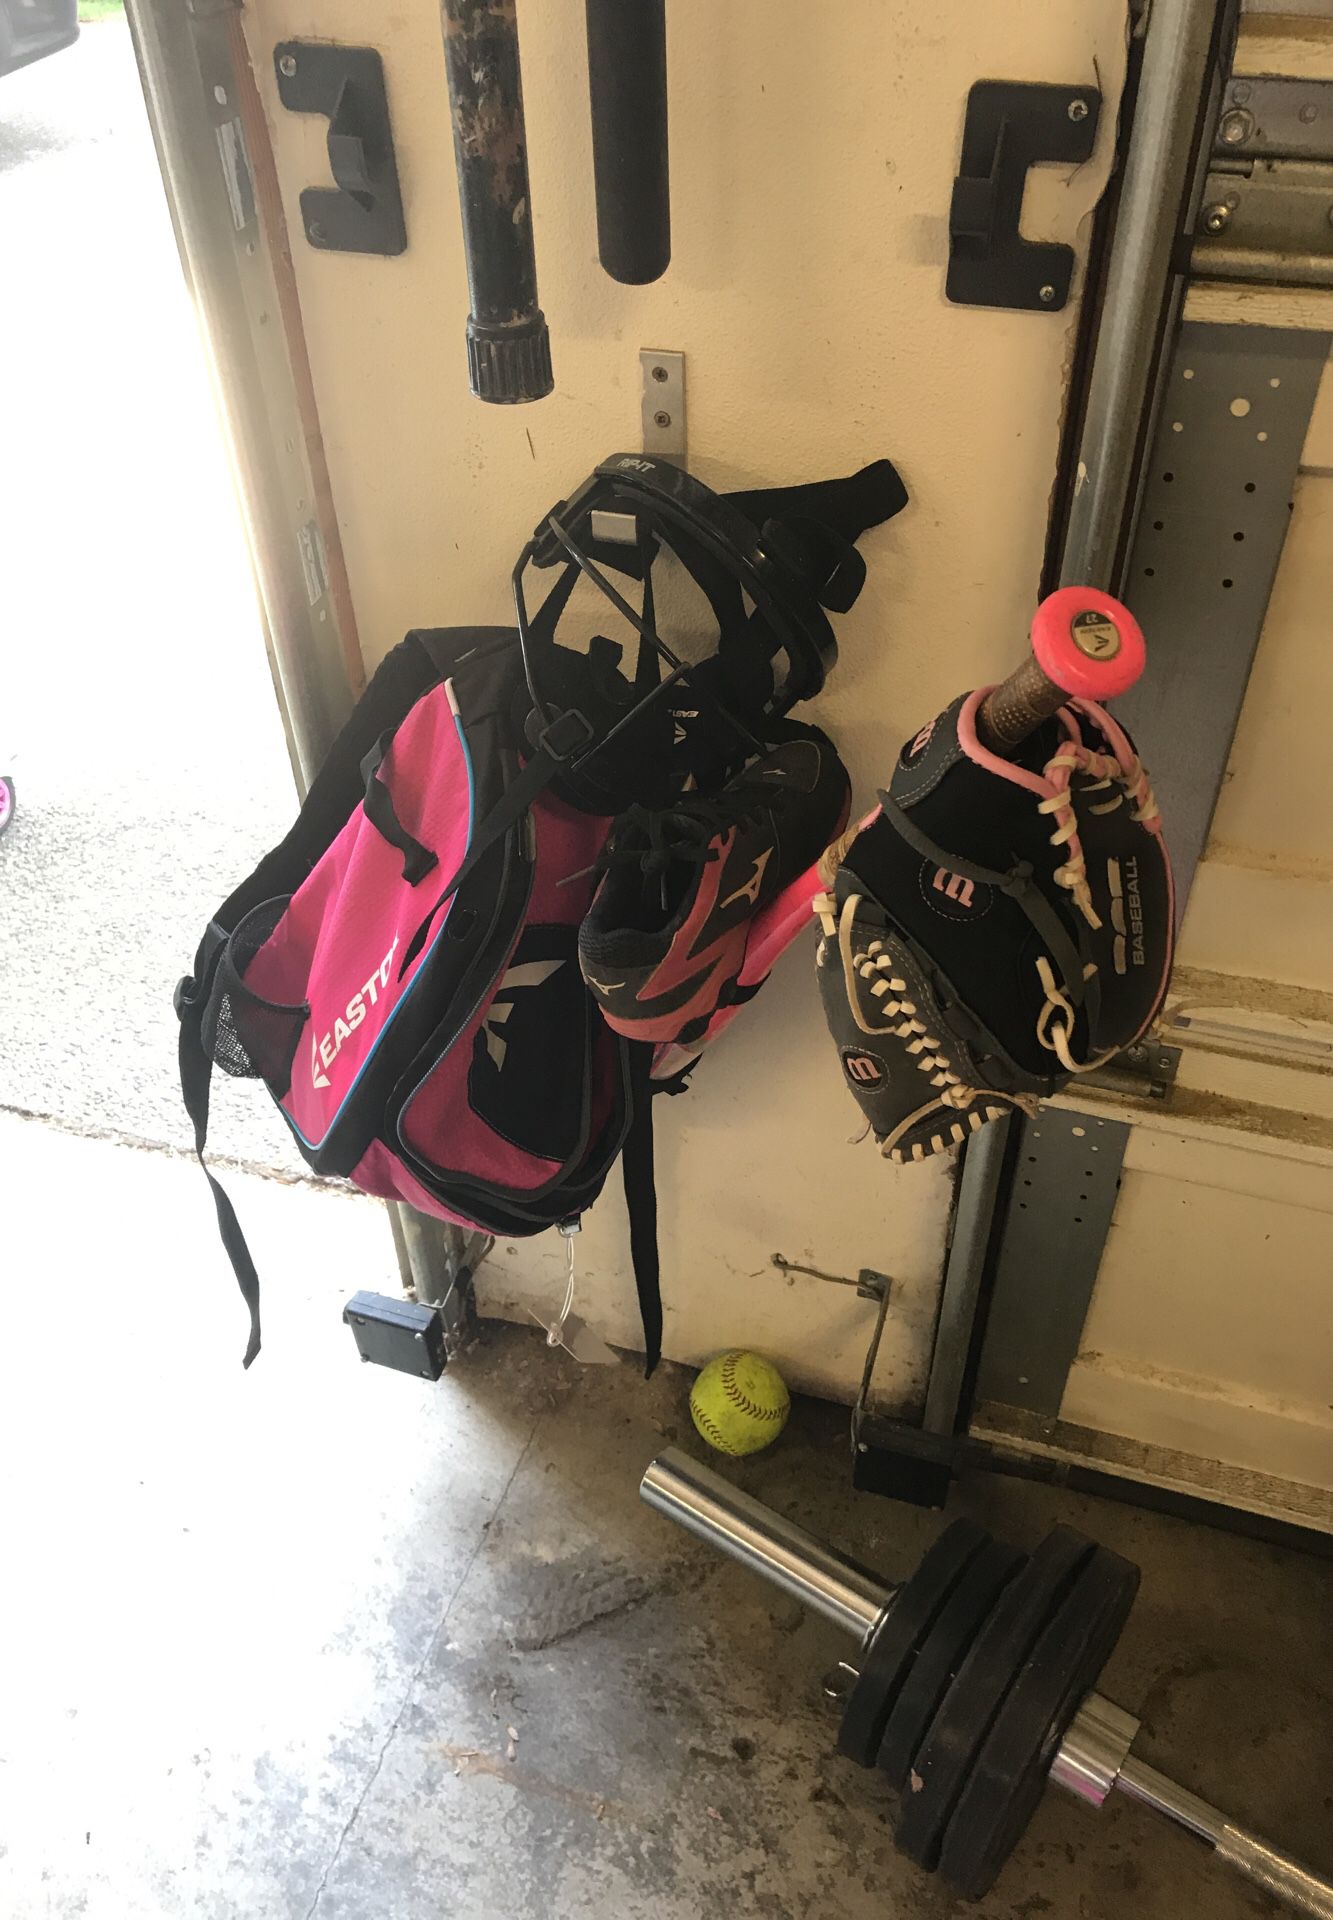 Softball gear. Size 1 1/2 gently used cleats. 27 inch bat. 10 1/2 inch glove. Easton bag and facemask. My daughter use them for one season